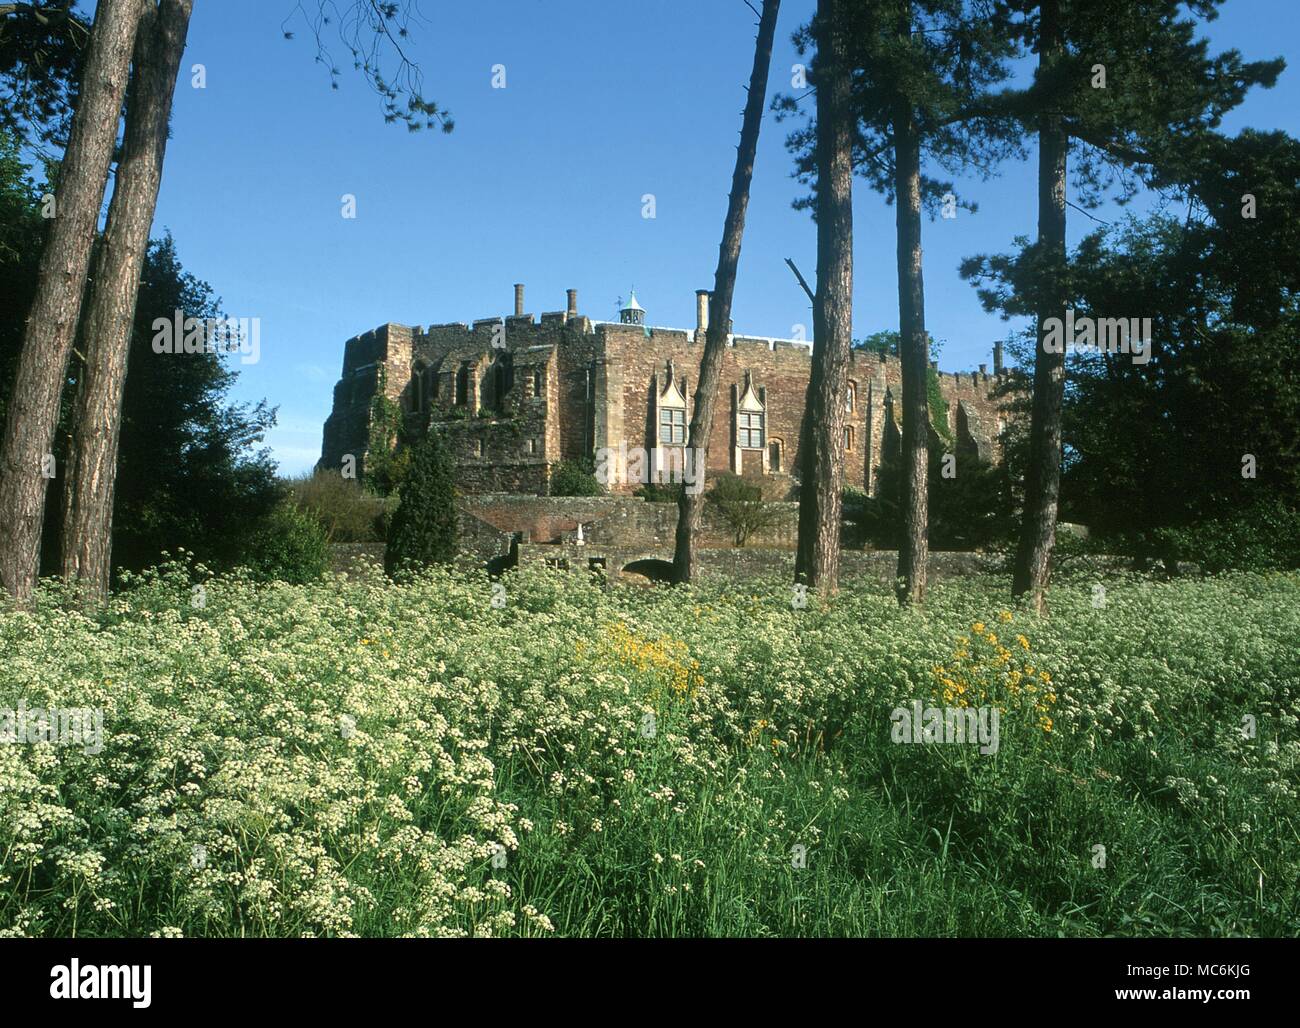 Hauntings. Berkeley Castle near Dursley,said to be haunted by the soul of King Edward II, who was tortured to death here in 1327, on the orders of Queen Isabelle. Stock Photo